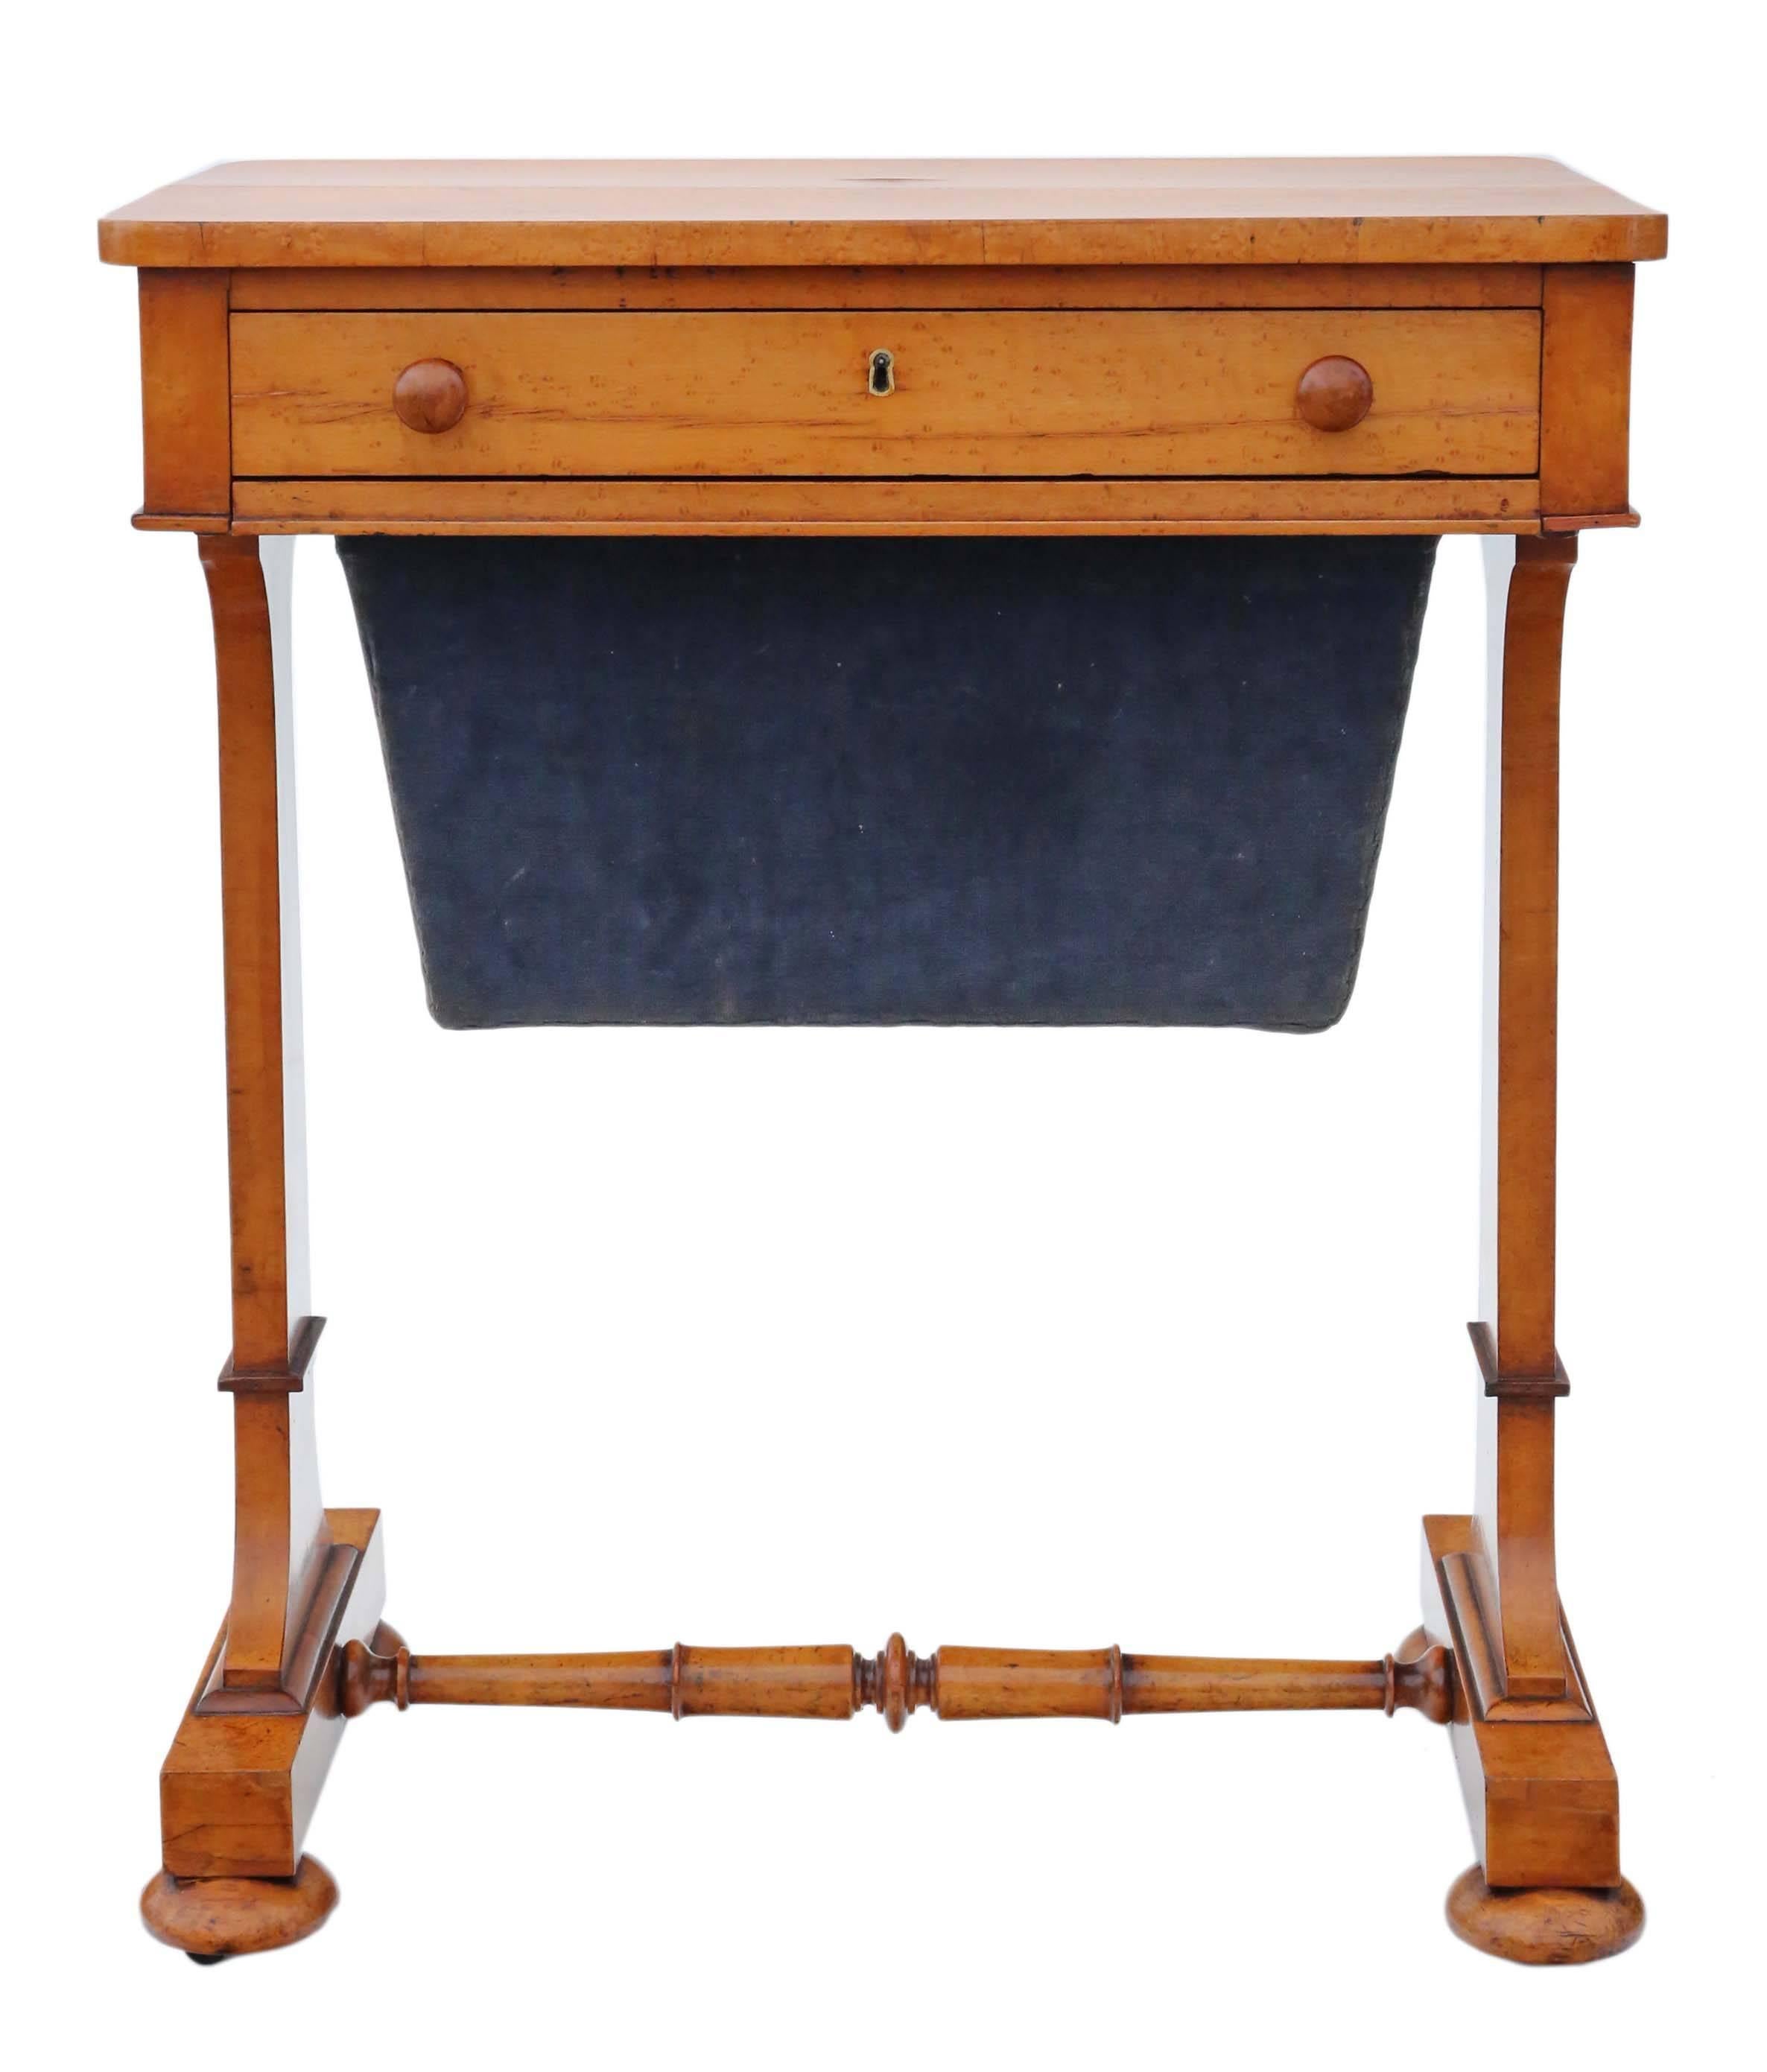 Antique William IV C1835 bird's-eye maple work / sewing box or table

No loose joints and no woodworm. Full of age, character and charm. The mahogany lined drawers slide freely.

Would look great in the right location!

Overall maximum